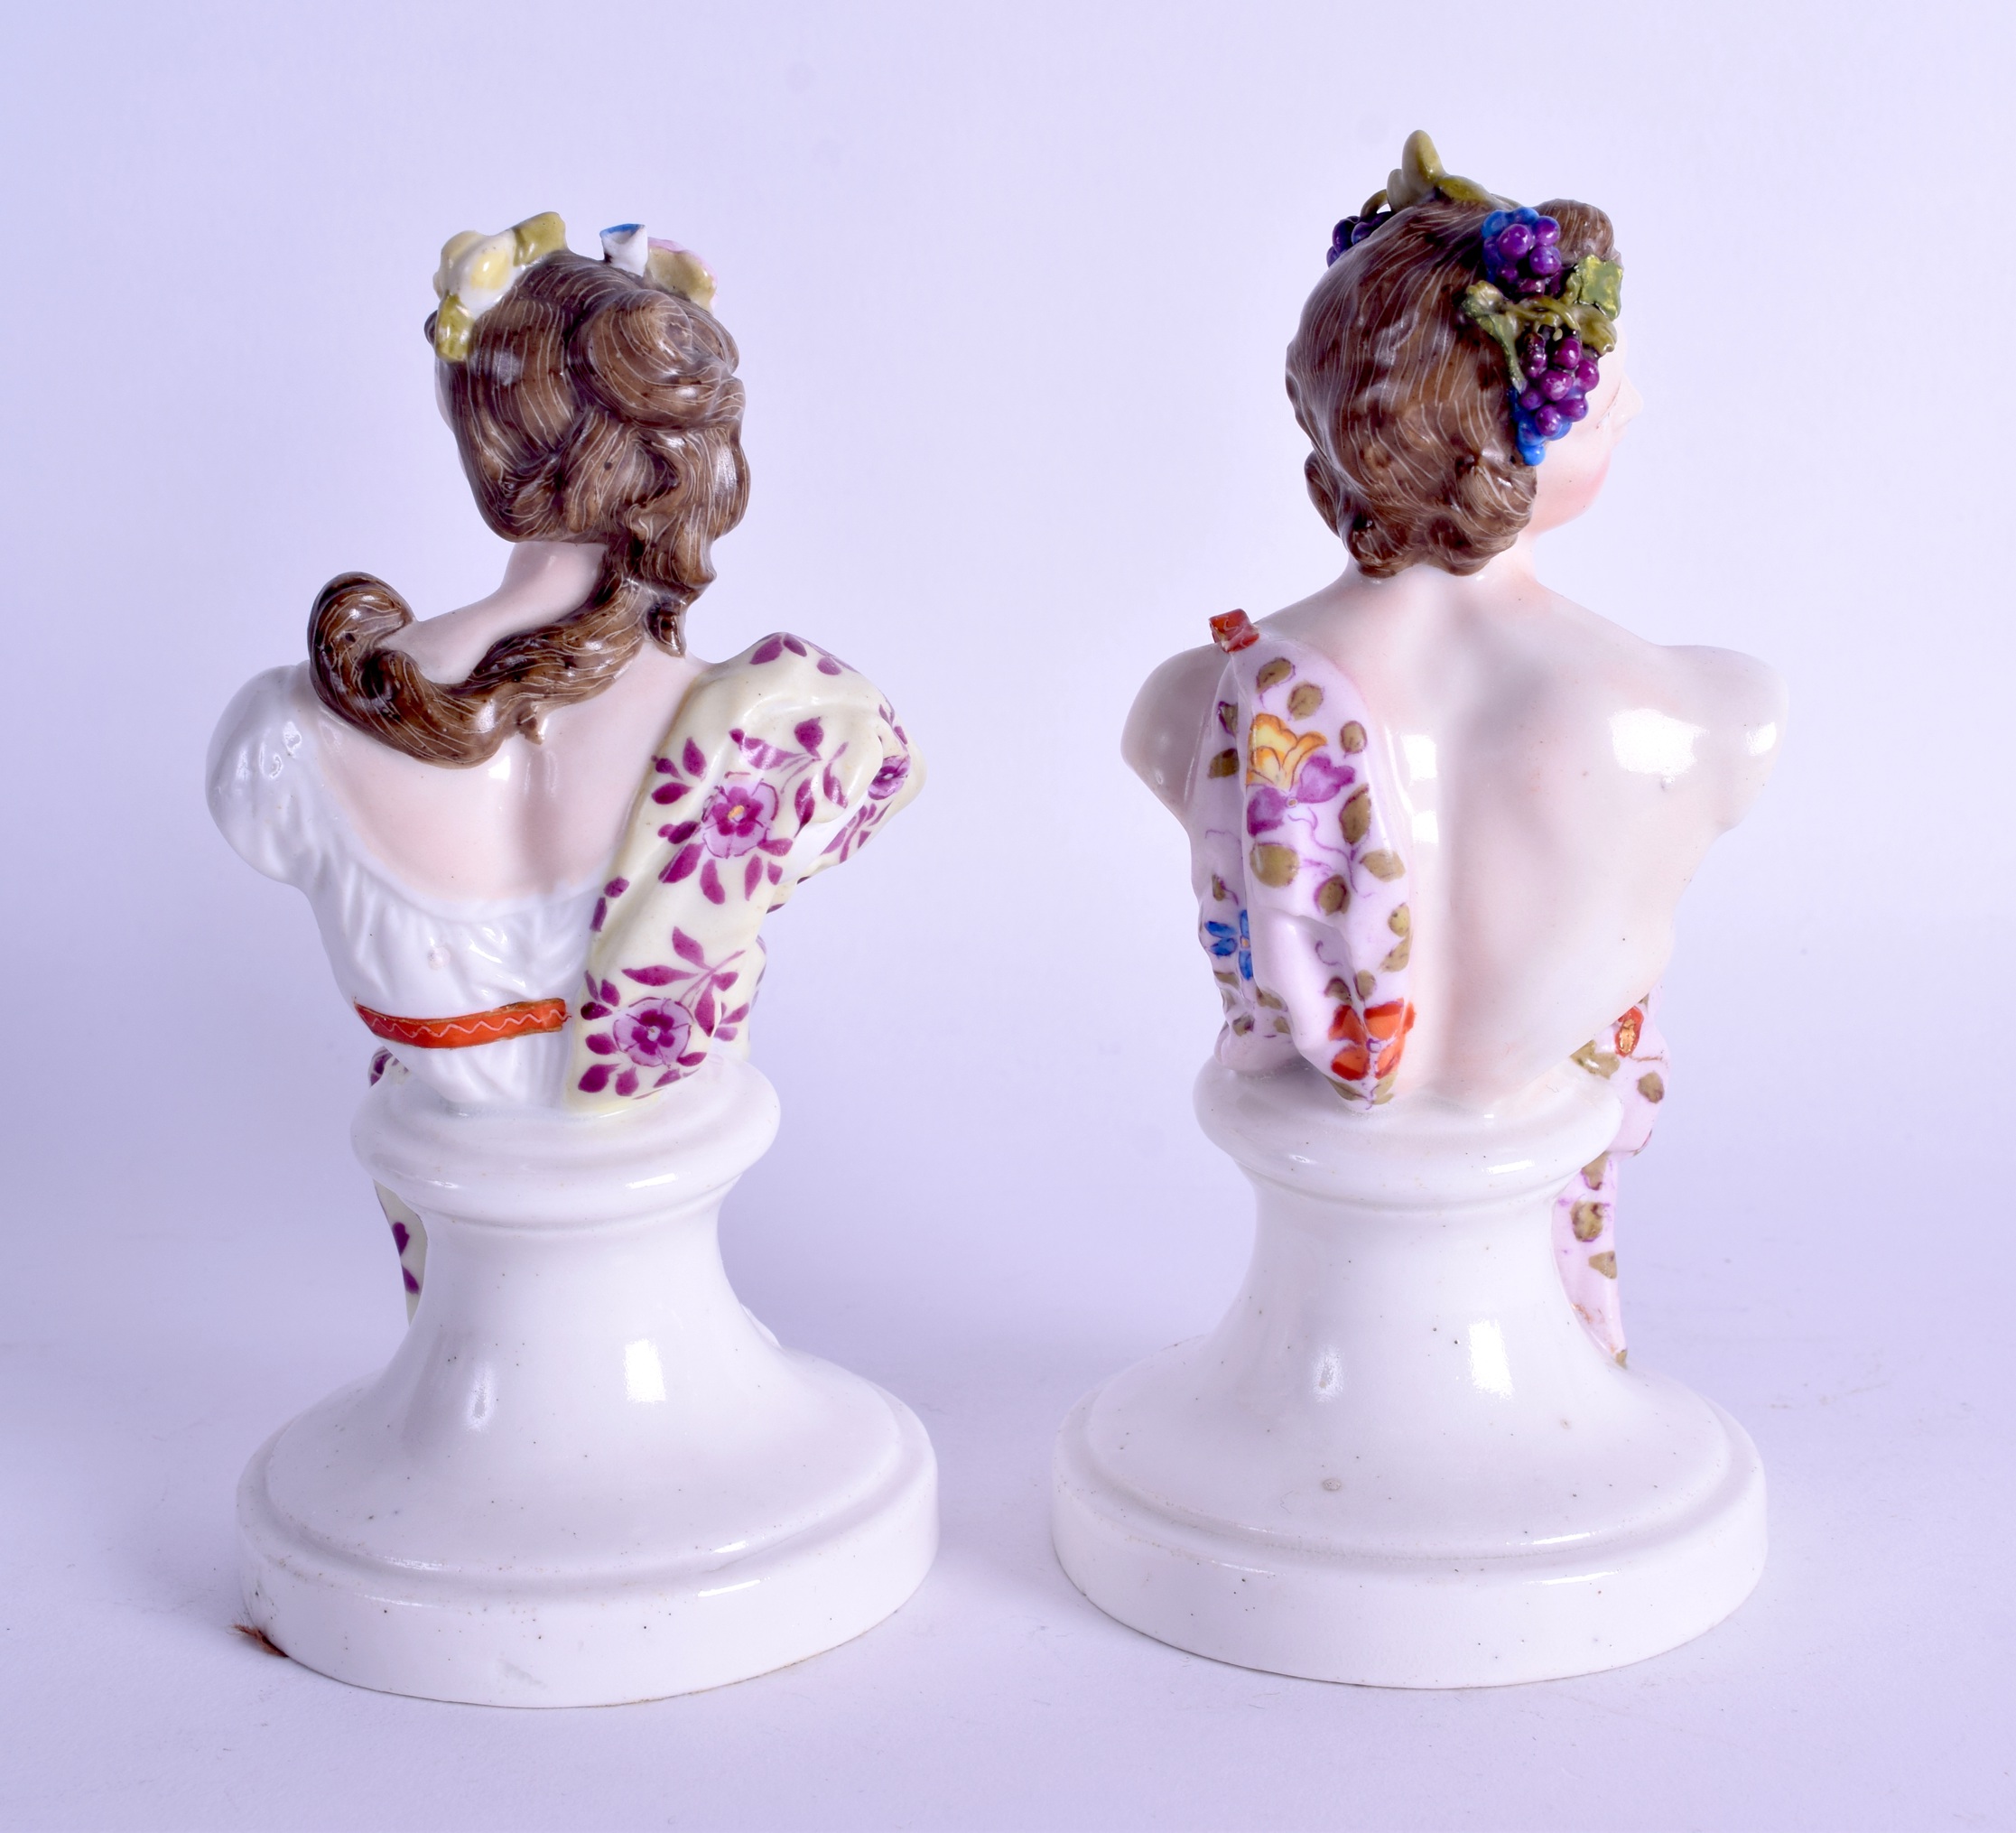 A PAIR OF 19TH CENTURY GERMAN PORCELAIN FIGURAL BUSTS painted with foliage and vines. 15 cm high. - Bild 2 aus 3